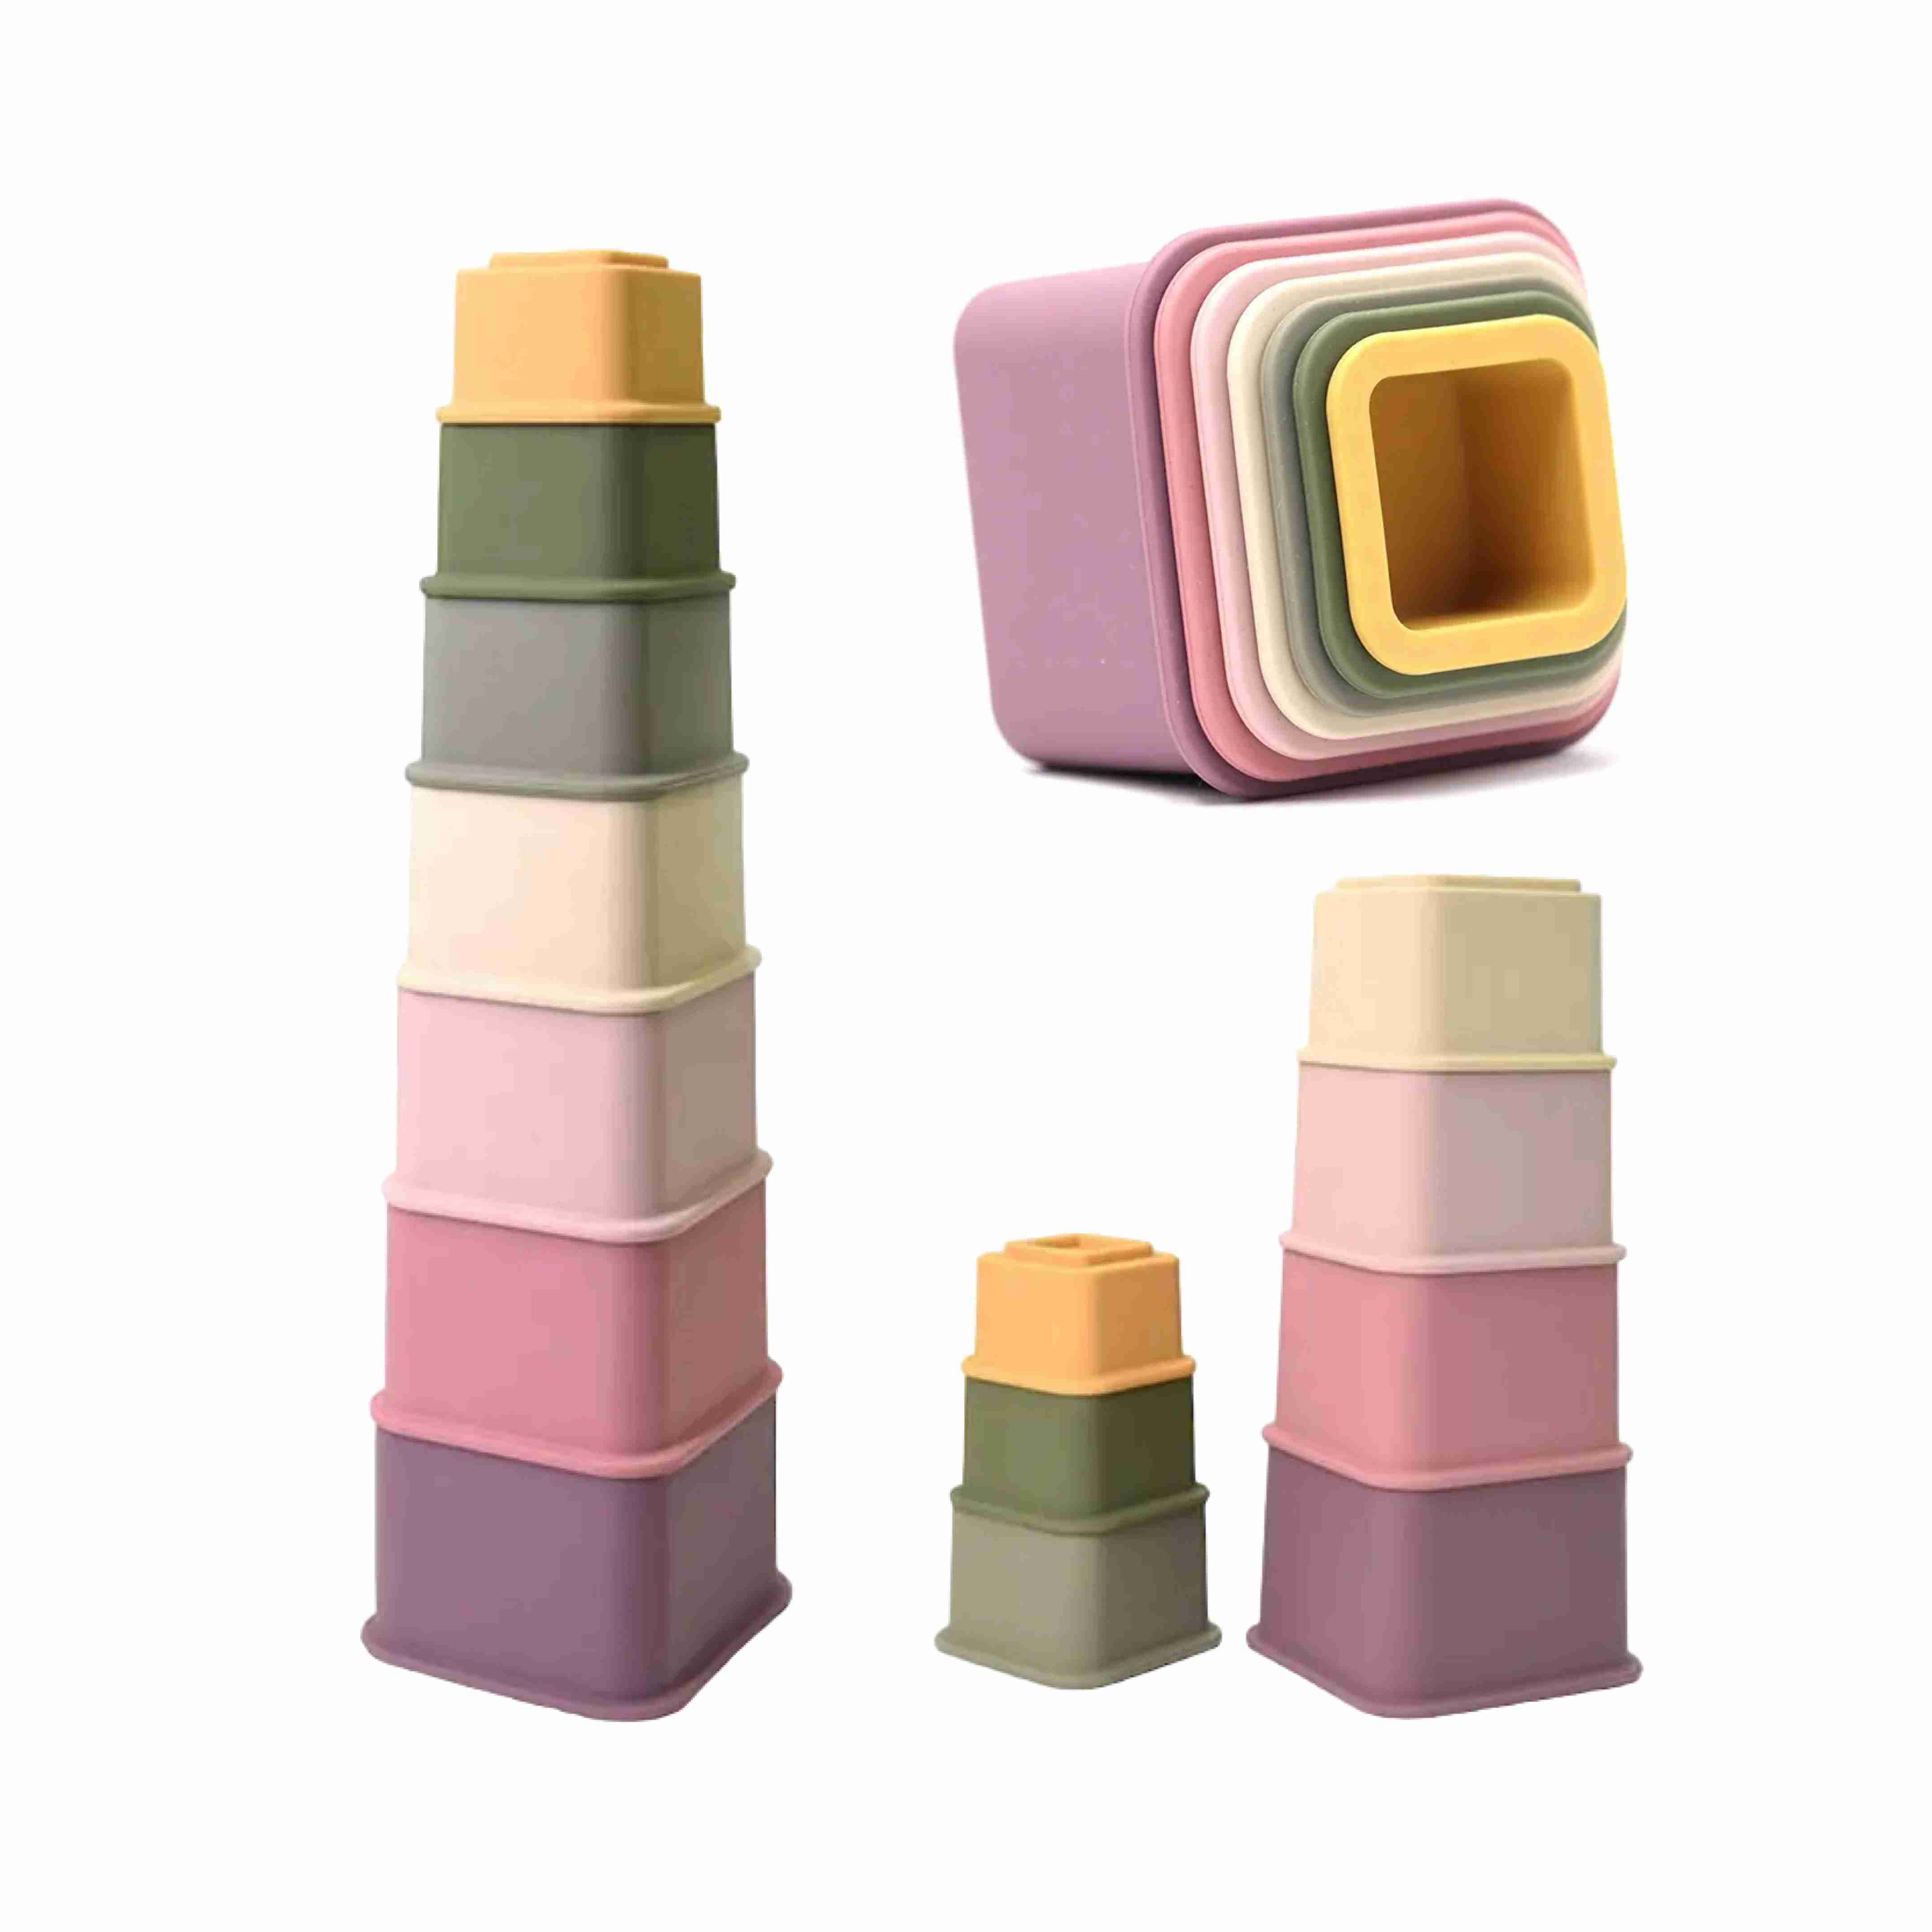 square-silicon-stacking-cups-montessori-early-development with cash back rebate